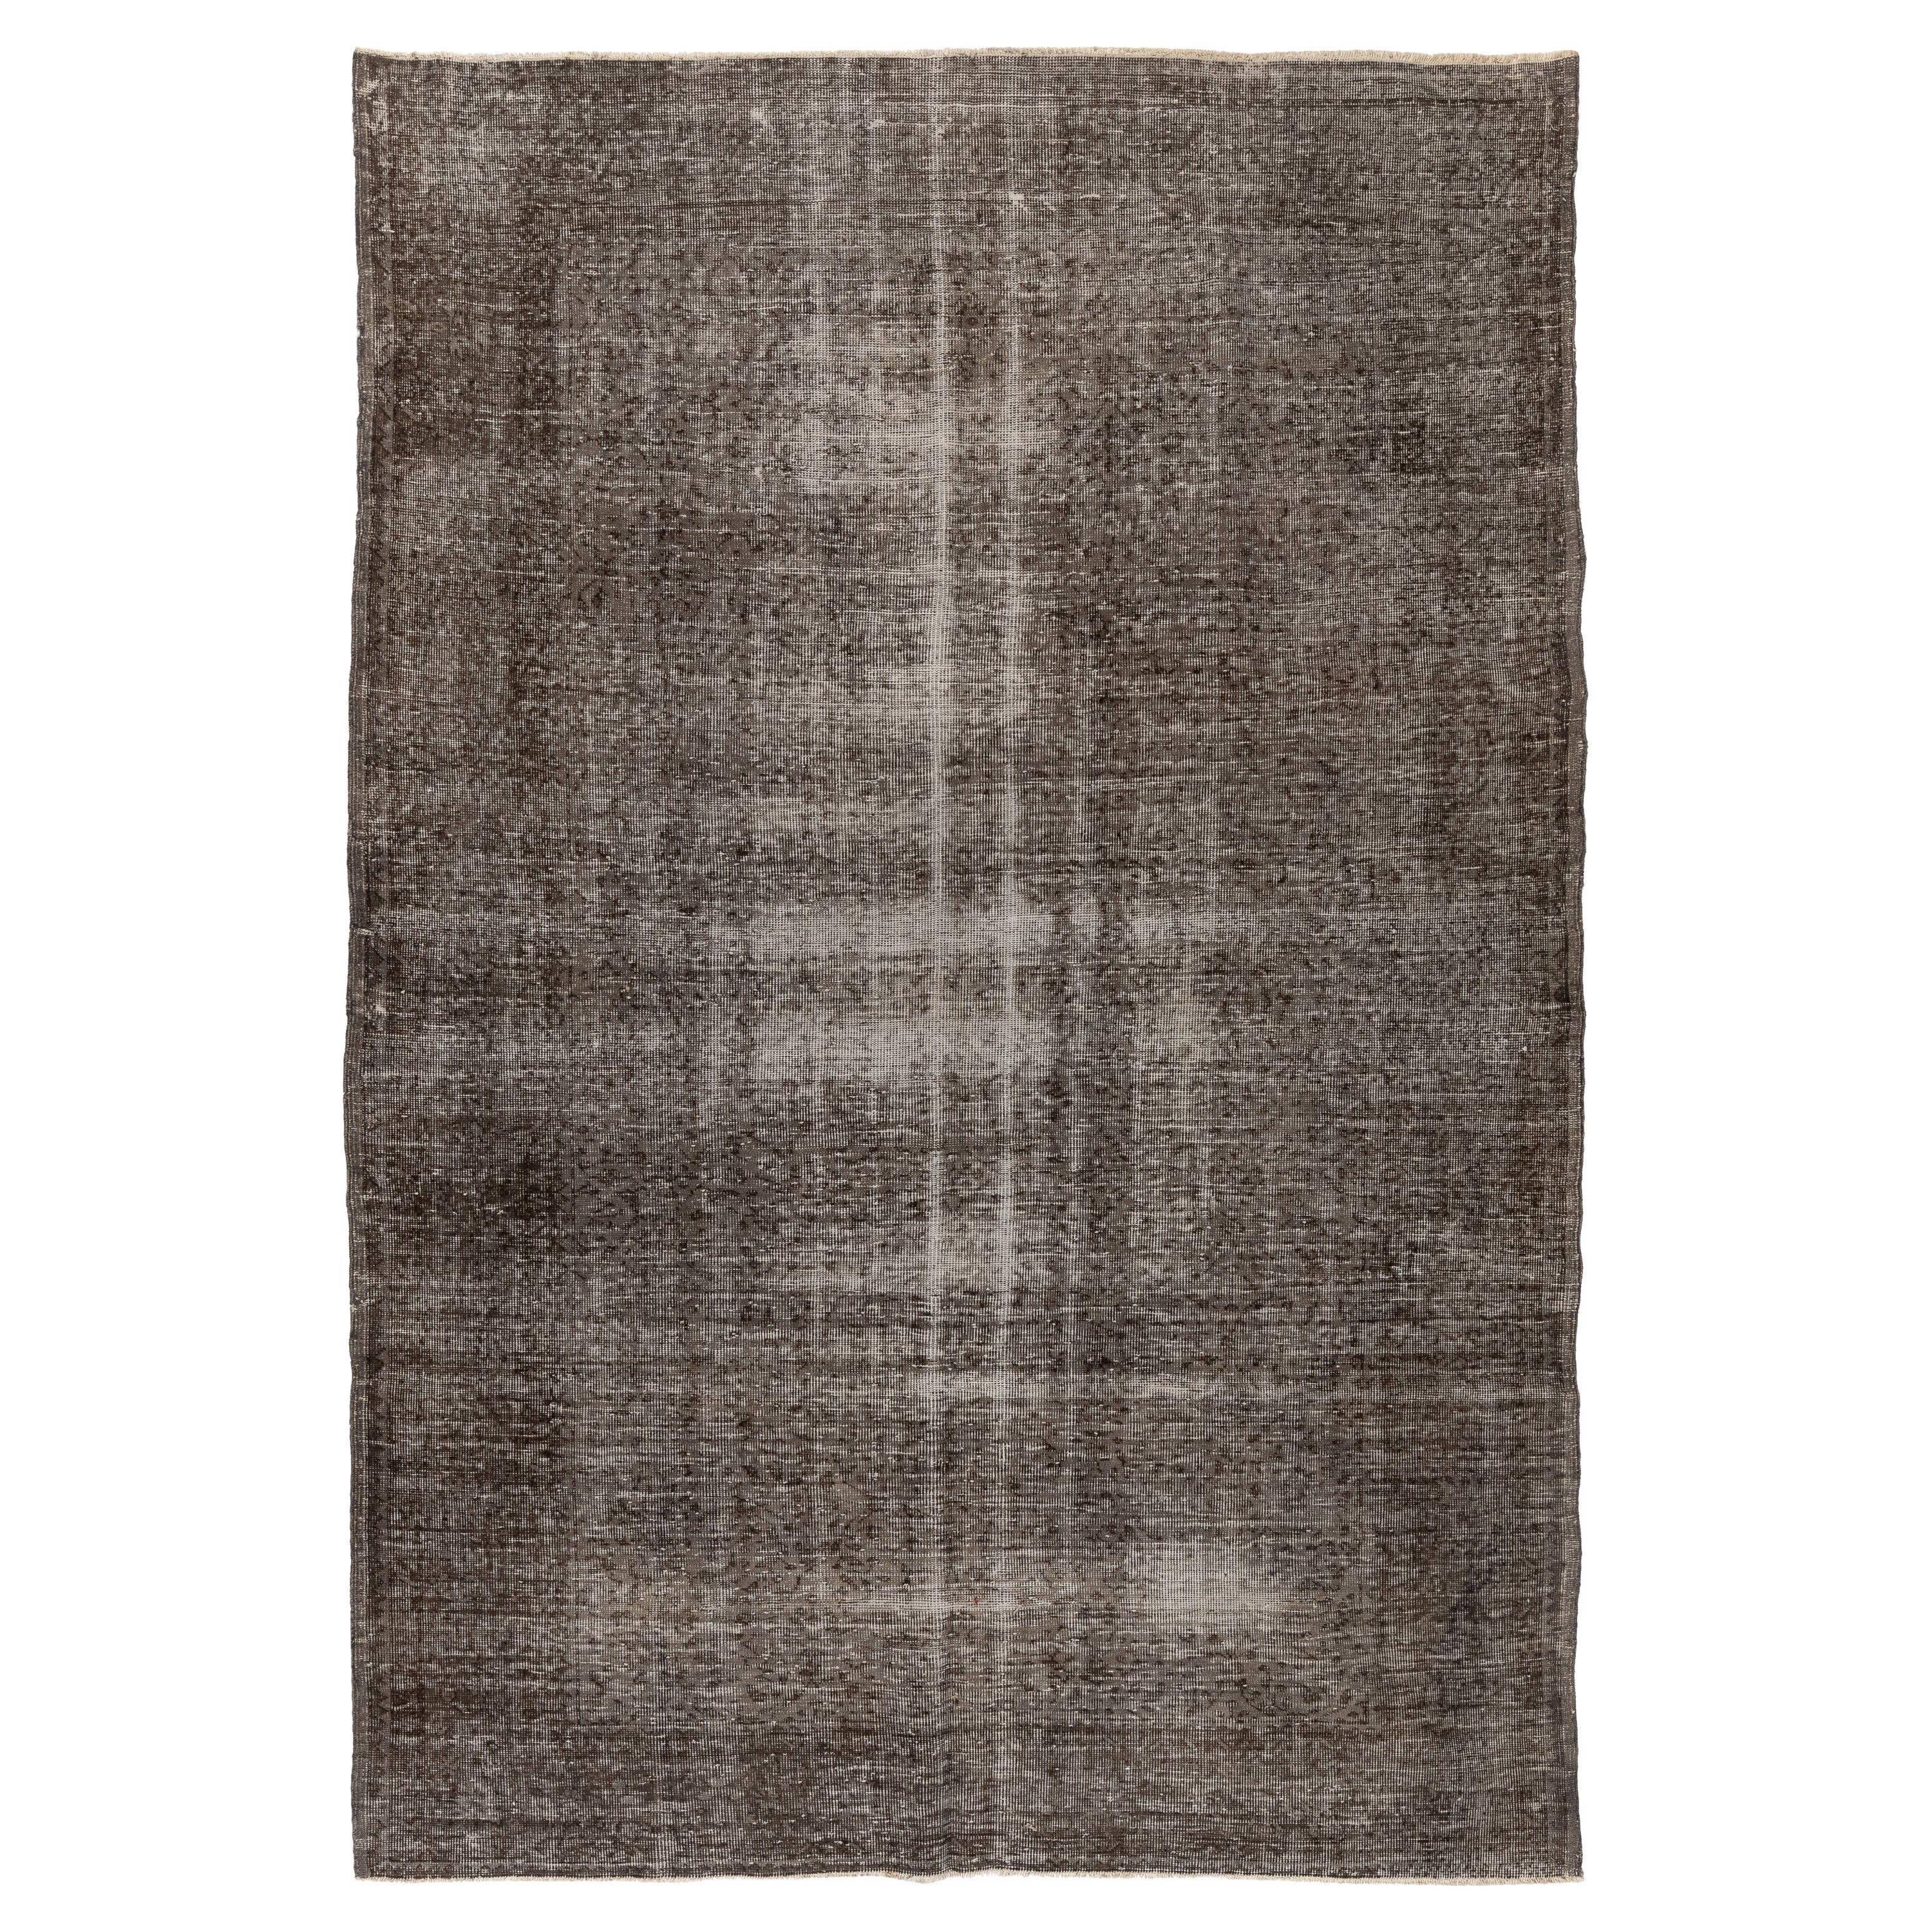 7x10 Ft Handmade Distressed 1950s Turkish Rug in Gray and Taupe, Modern Carpet For Sale